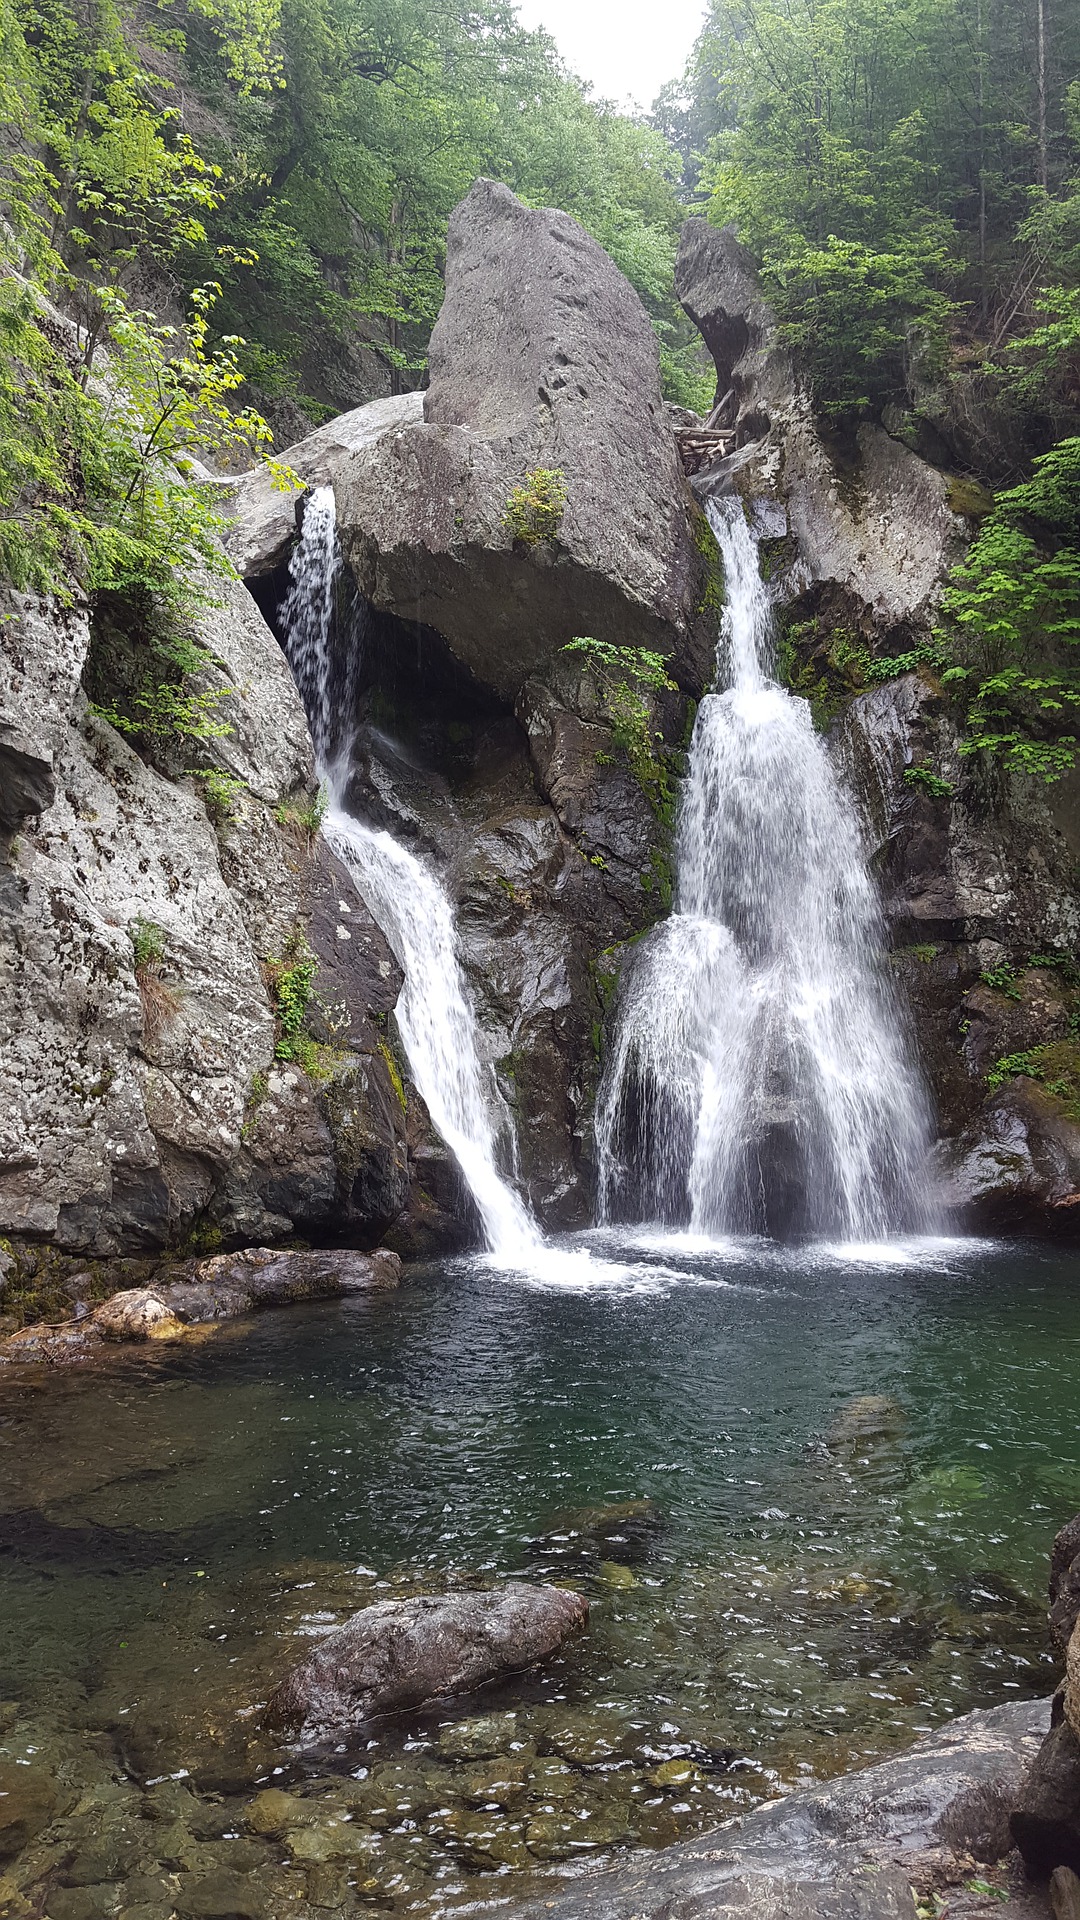 Bash Bish Falls, Great Barrington, Massachusetts | 6 Easygoing Towns in the Berkshires You Need to Visit